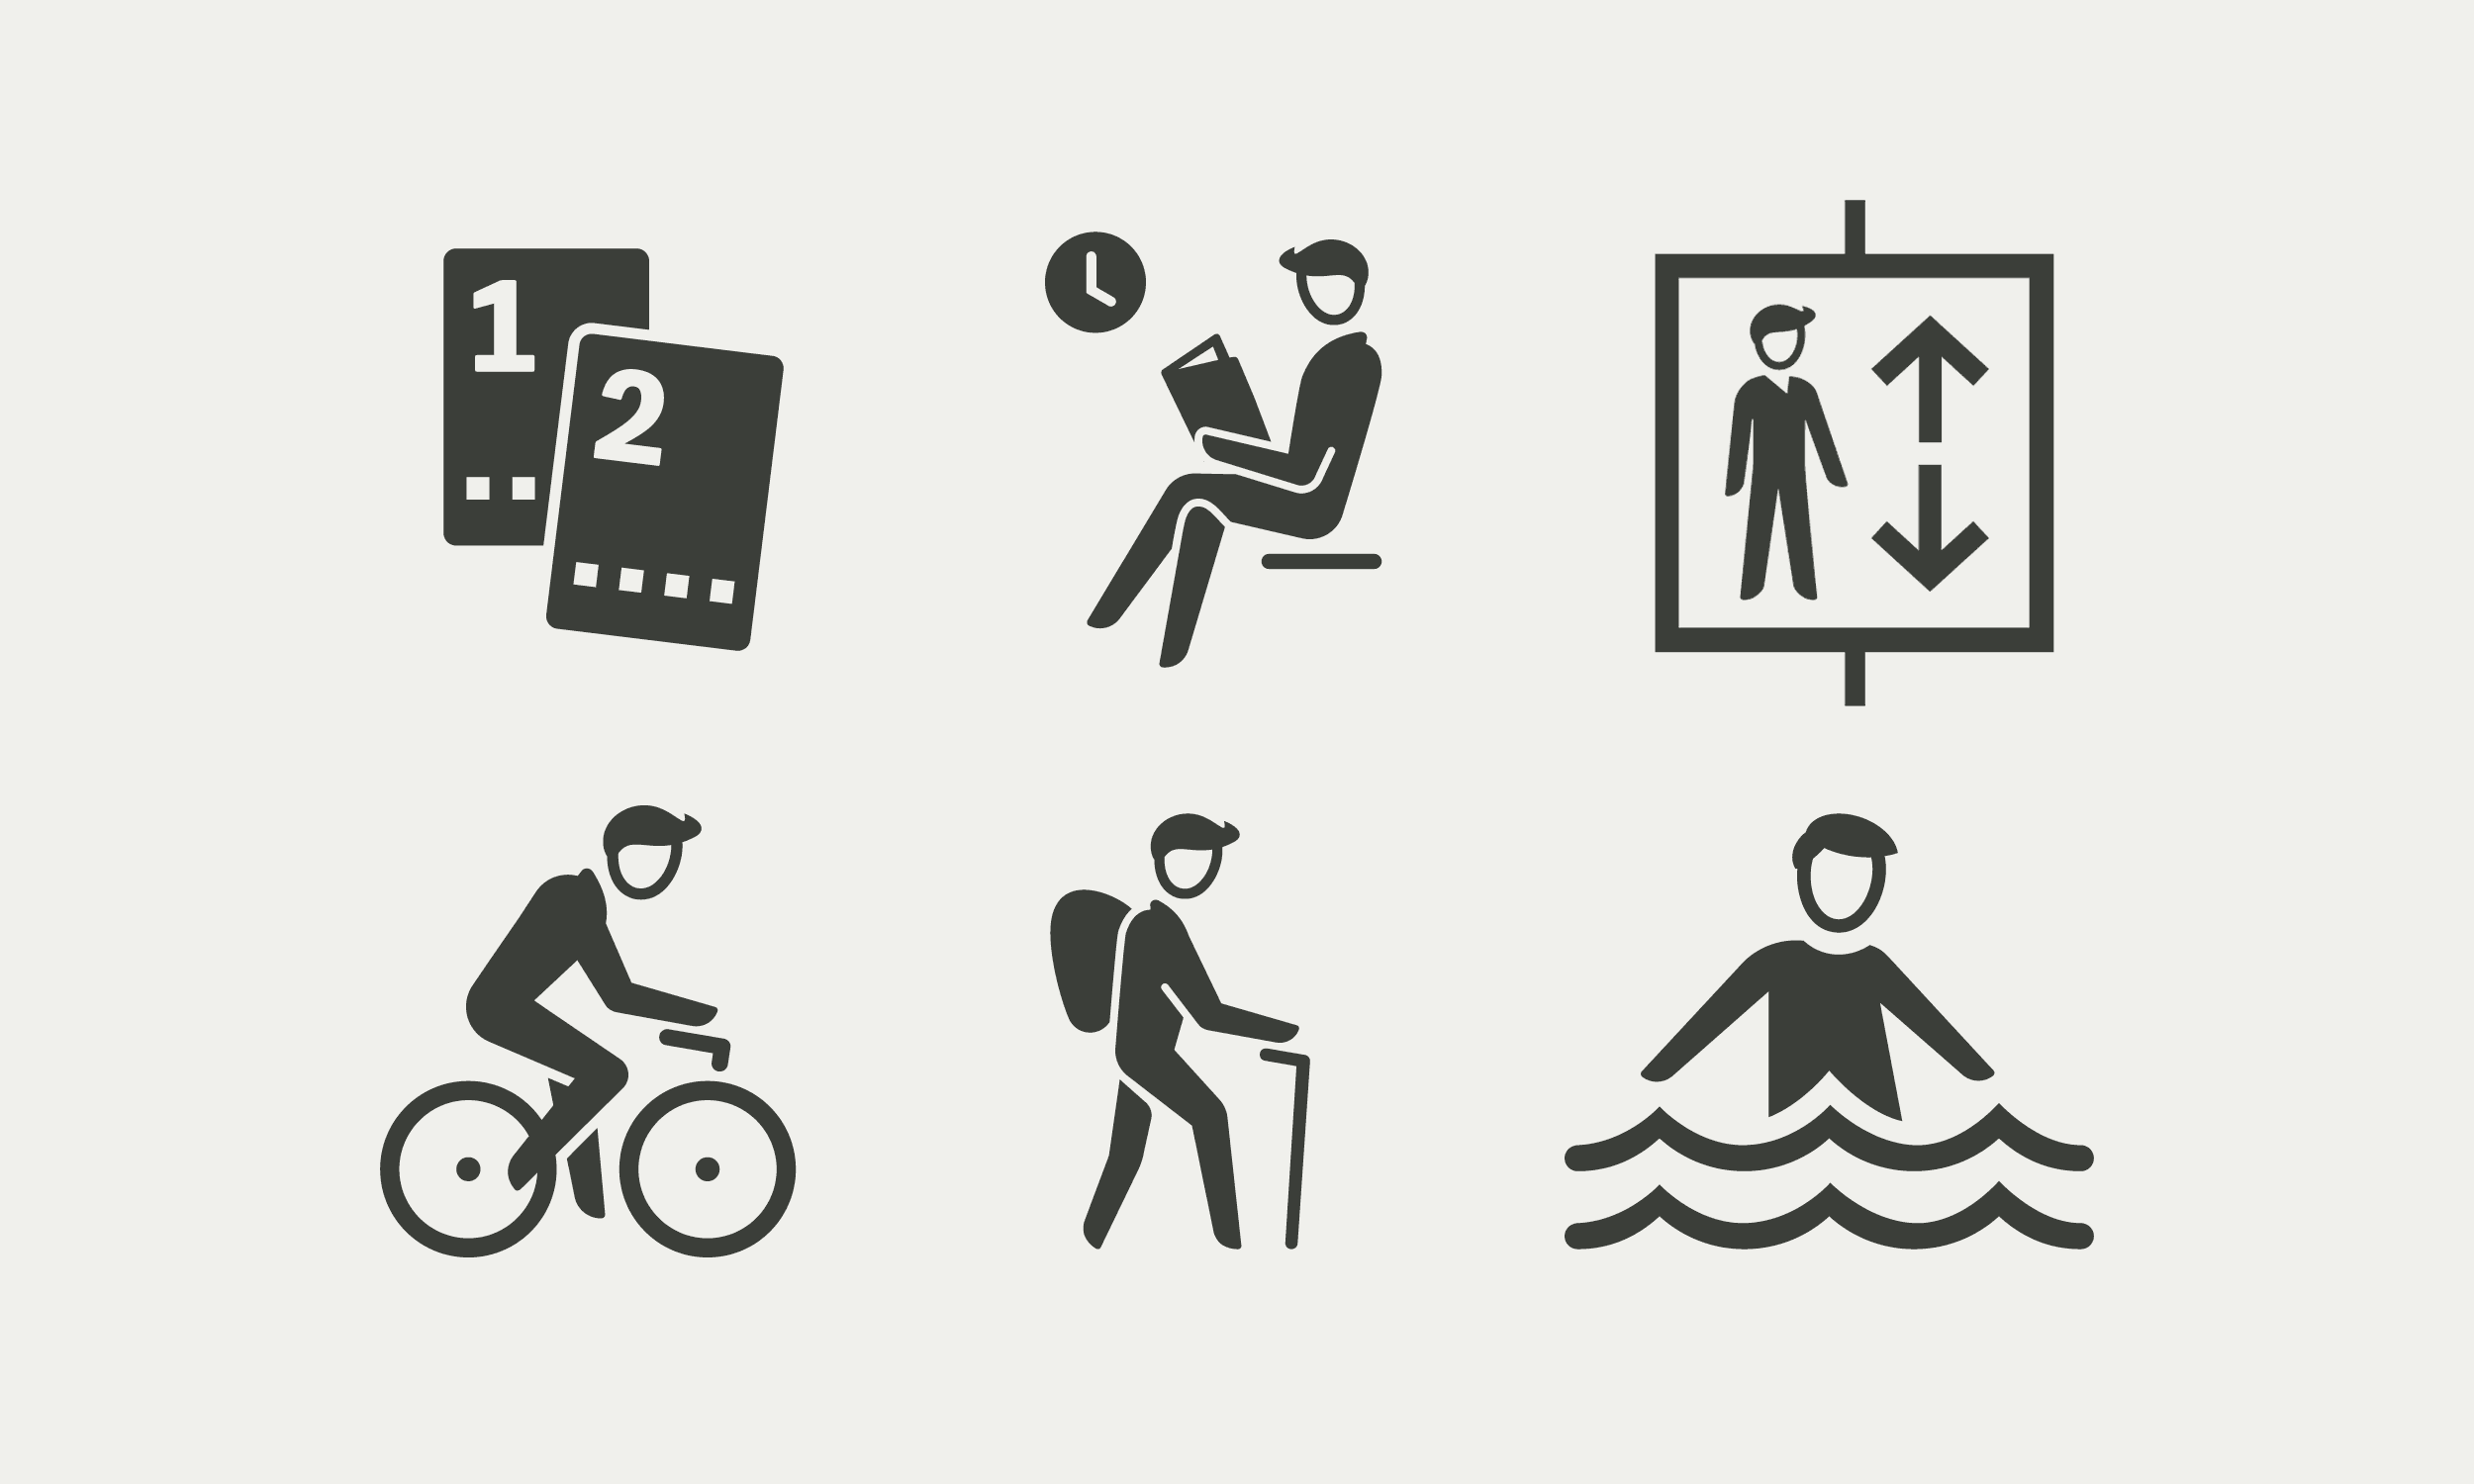 Illustration of pictograms for orientation in the civic station and for tourist activities